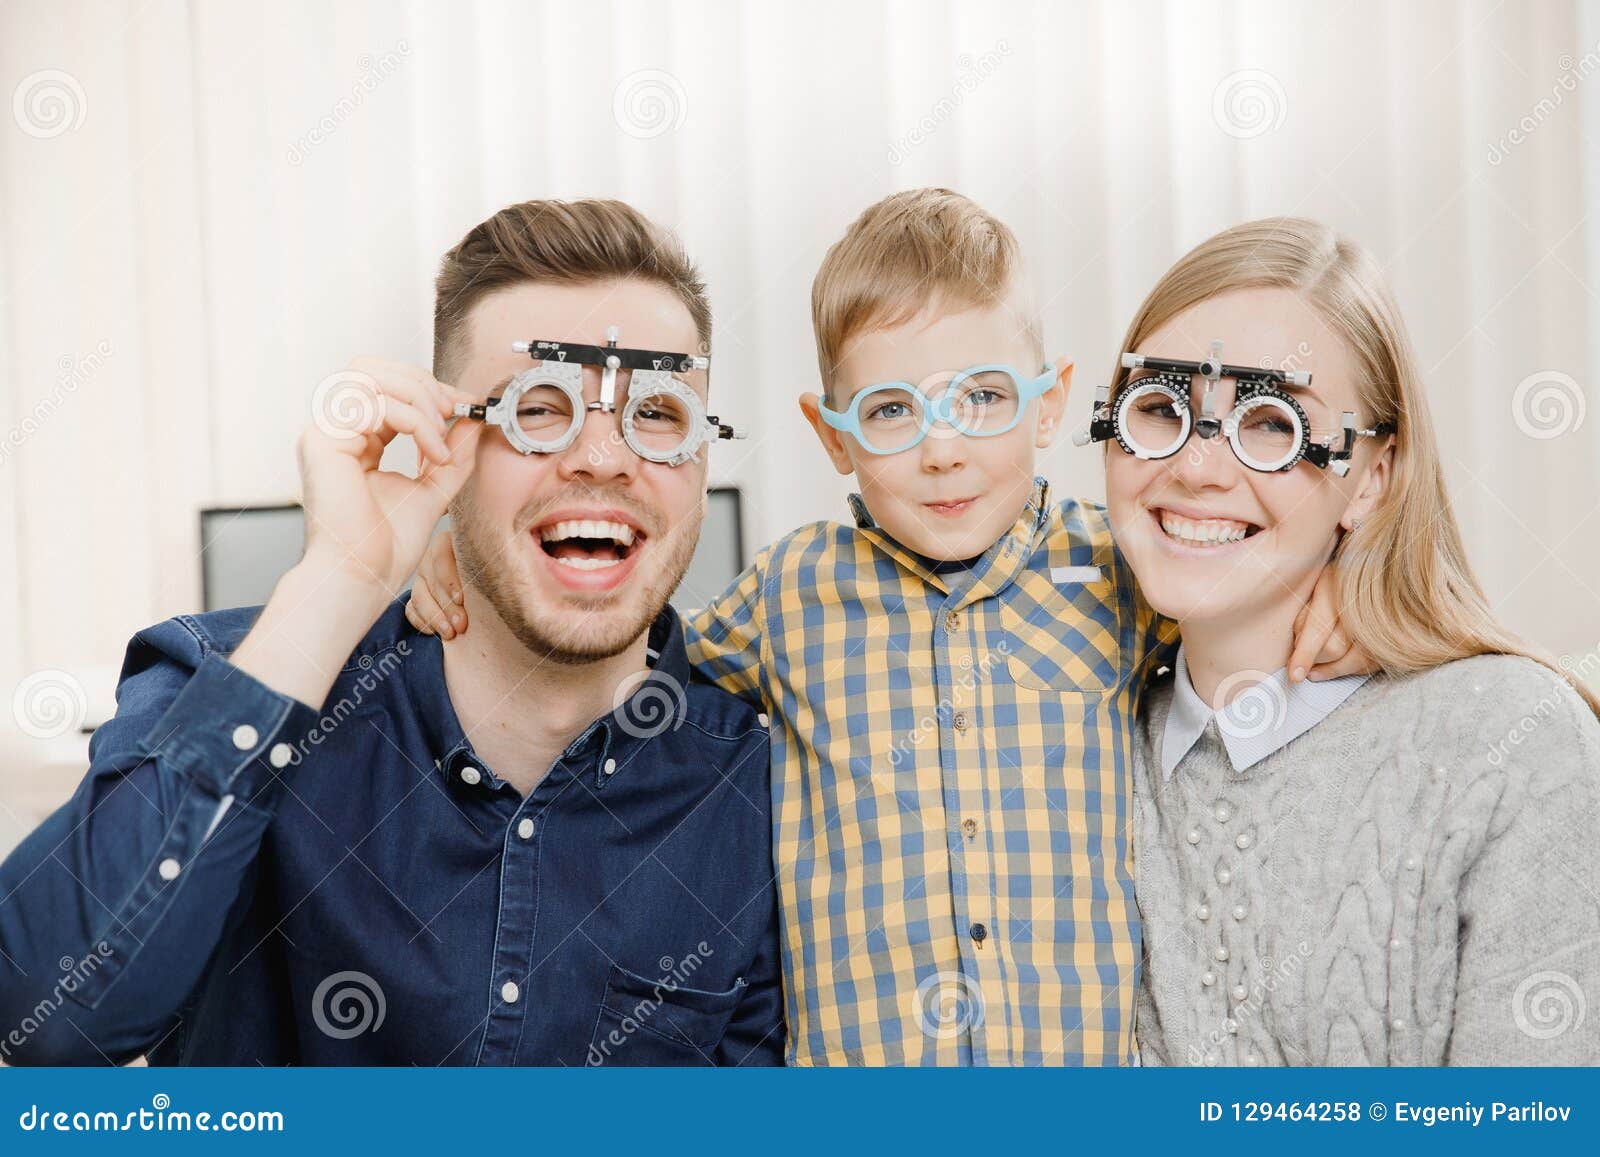 cheerful family with small child reception doctor ophthalmologist using glasses